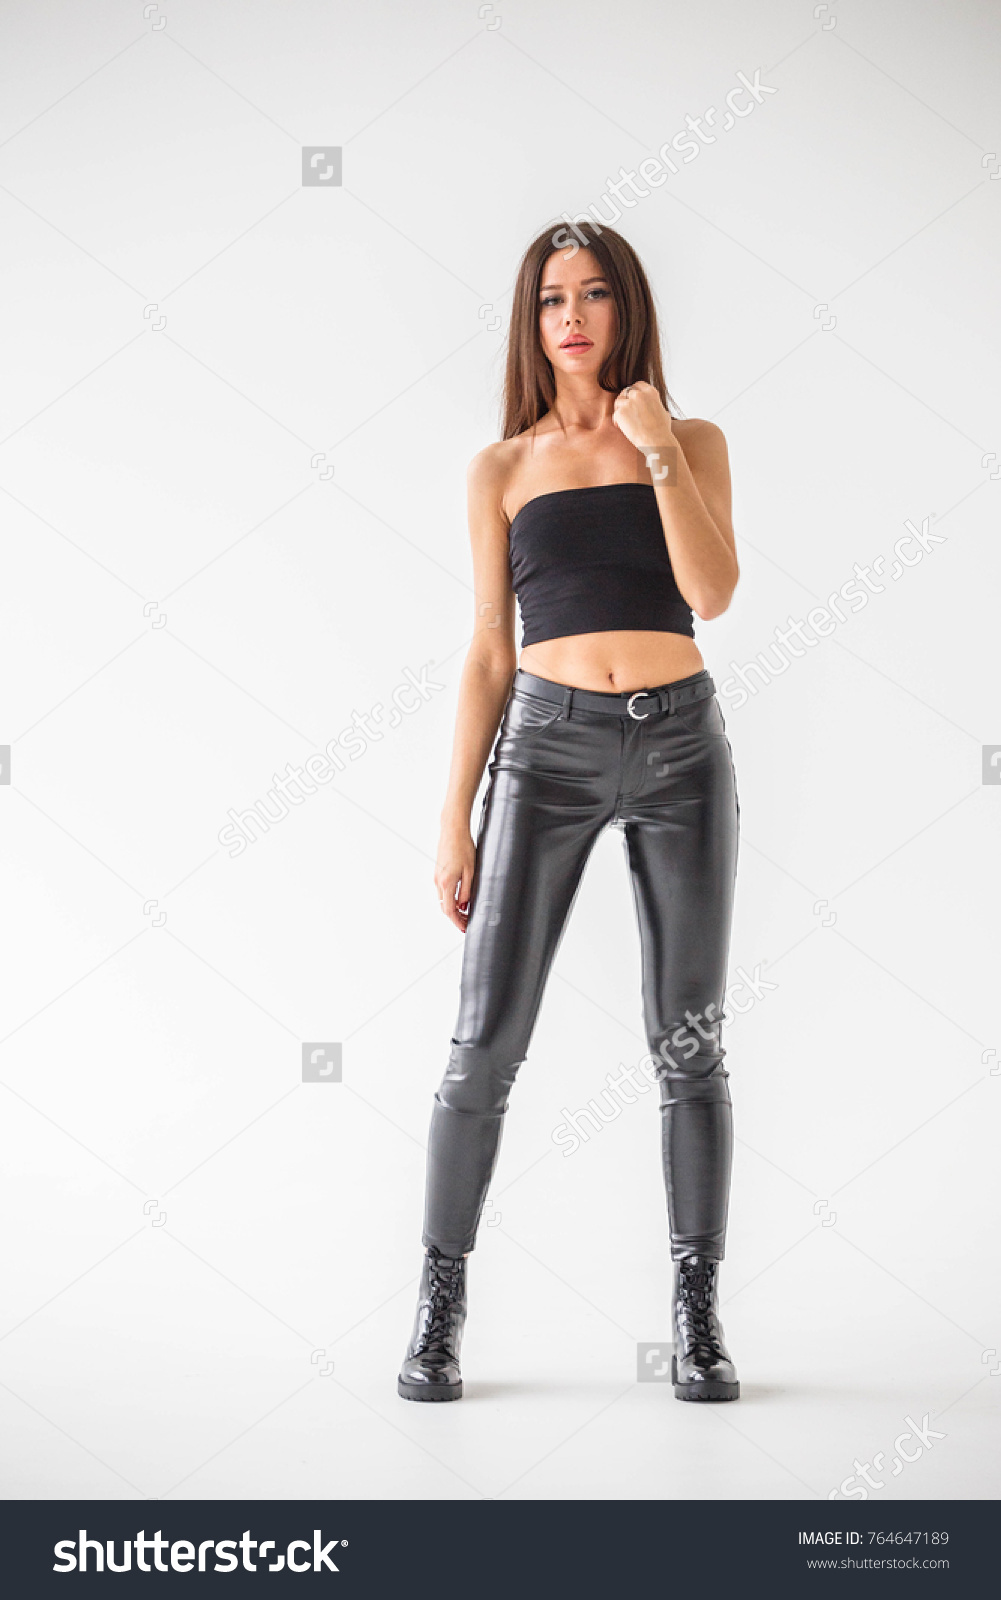 derald gregg recommends babes in leather pants pic